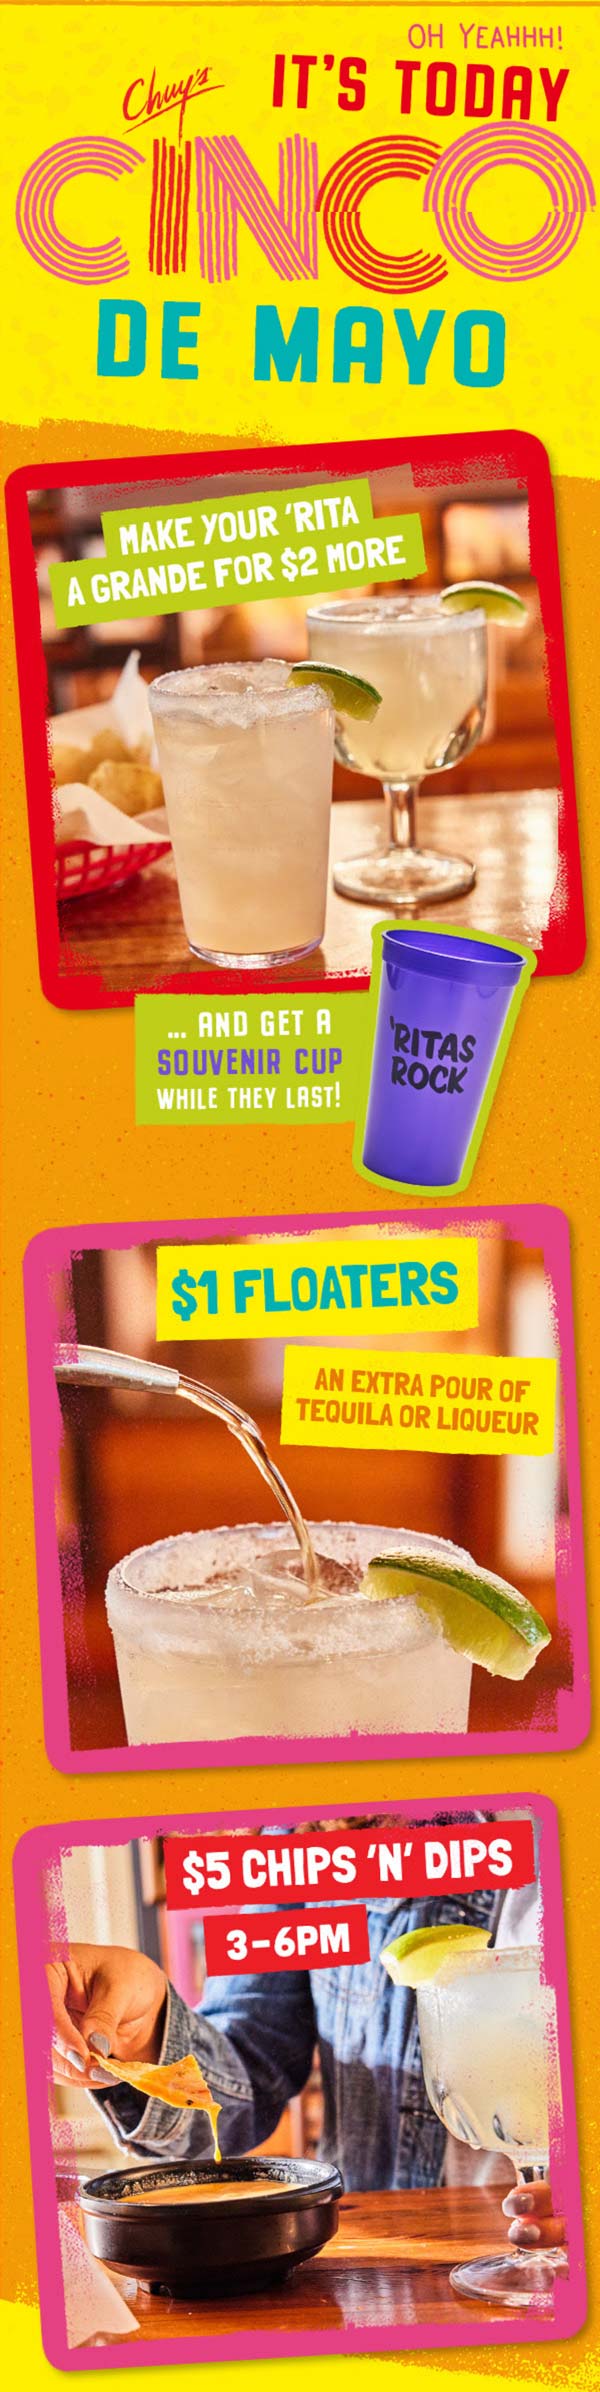 Chuys restaurants Coupon  $1 floaters & $5 chips n dips today at Chuys restaurants #chuys 